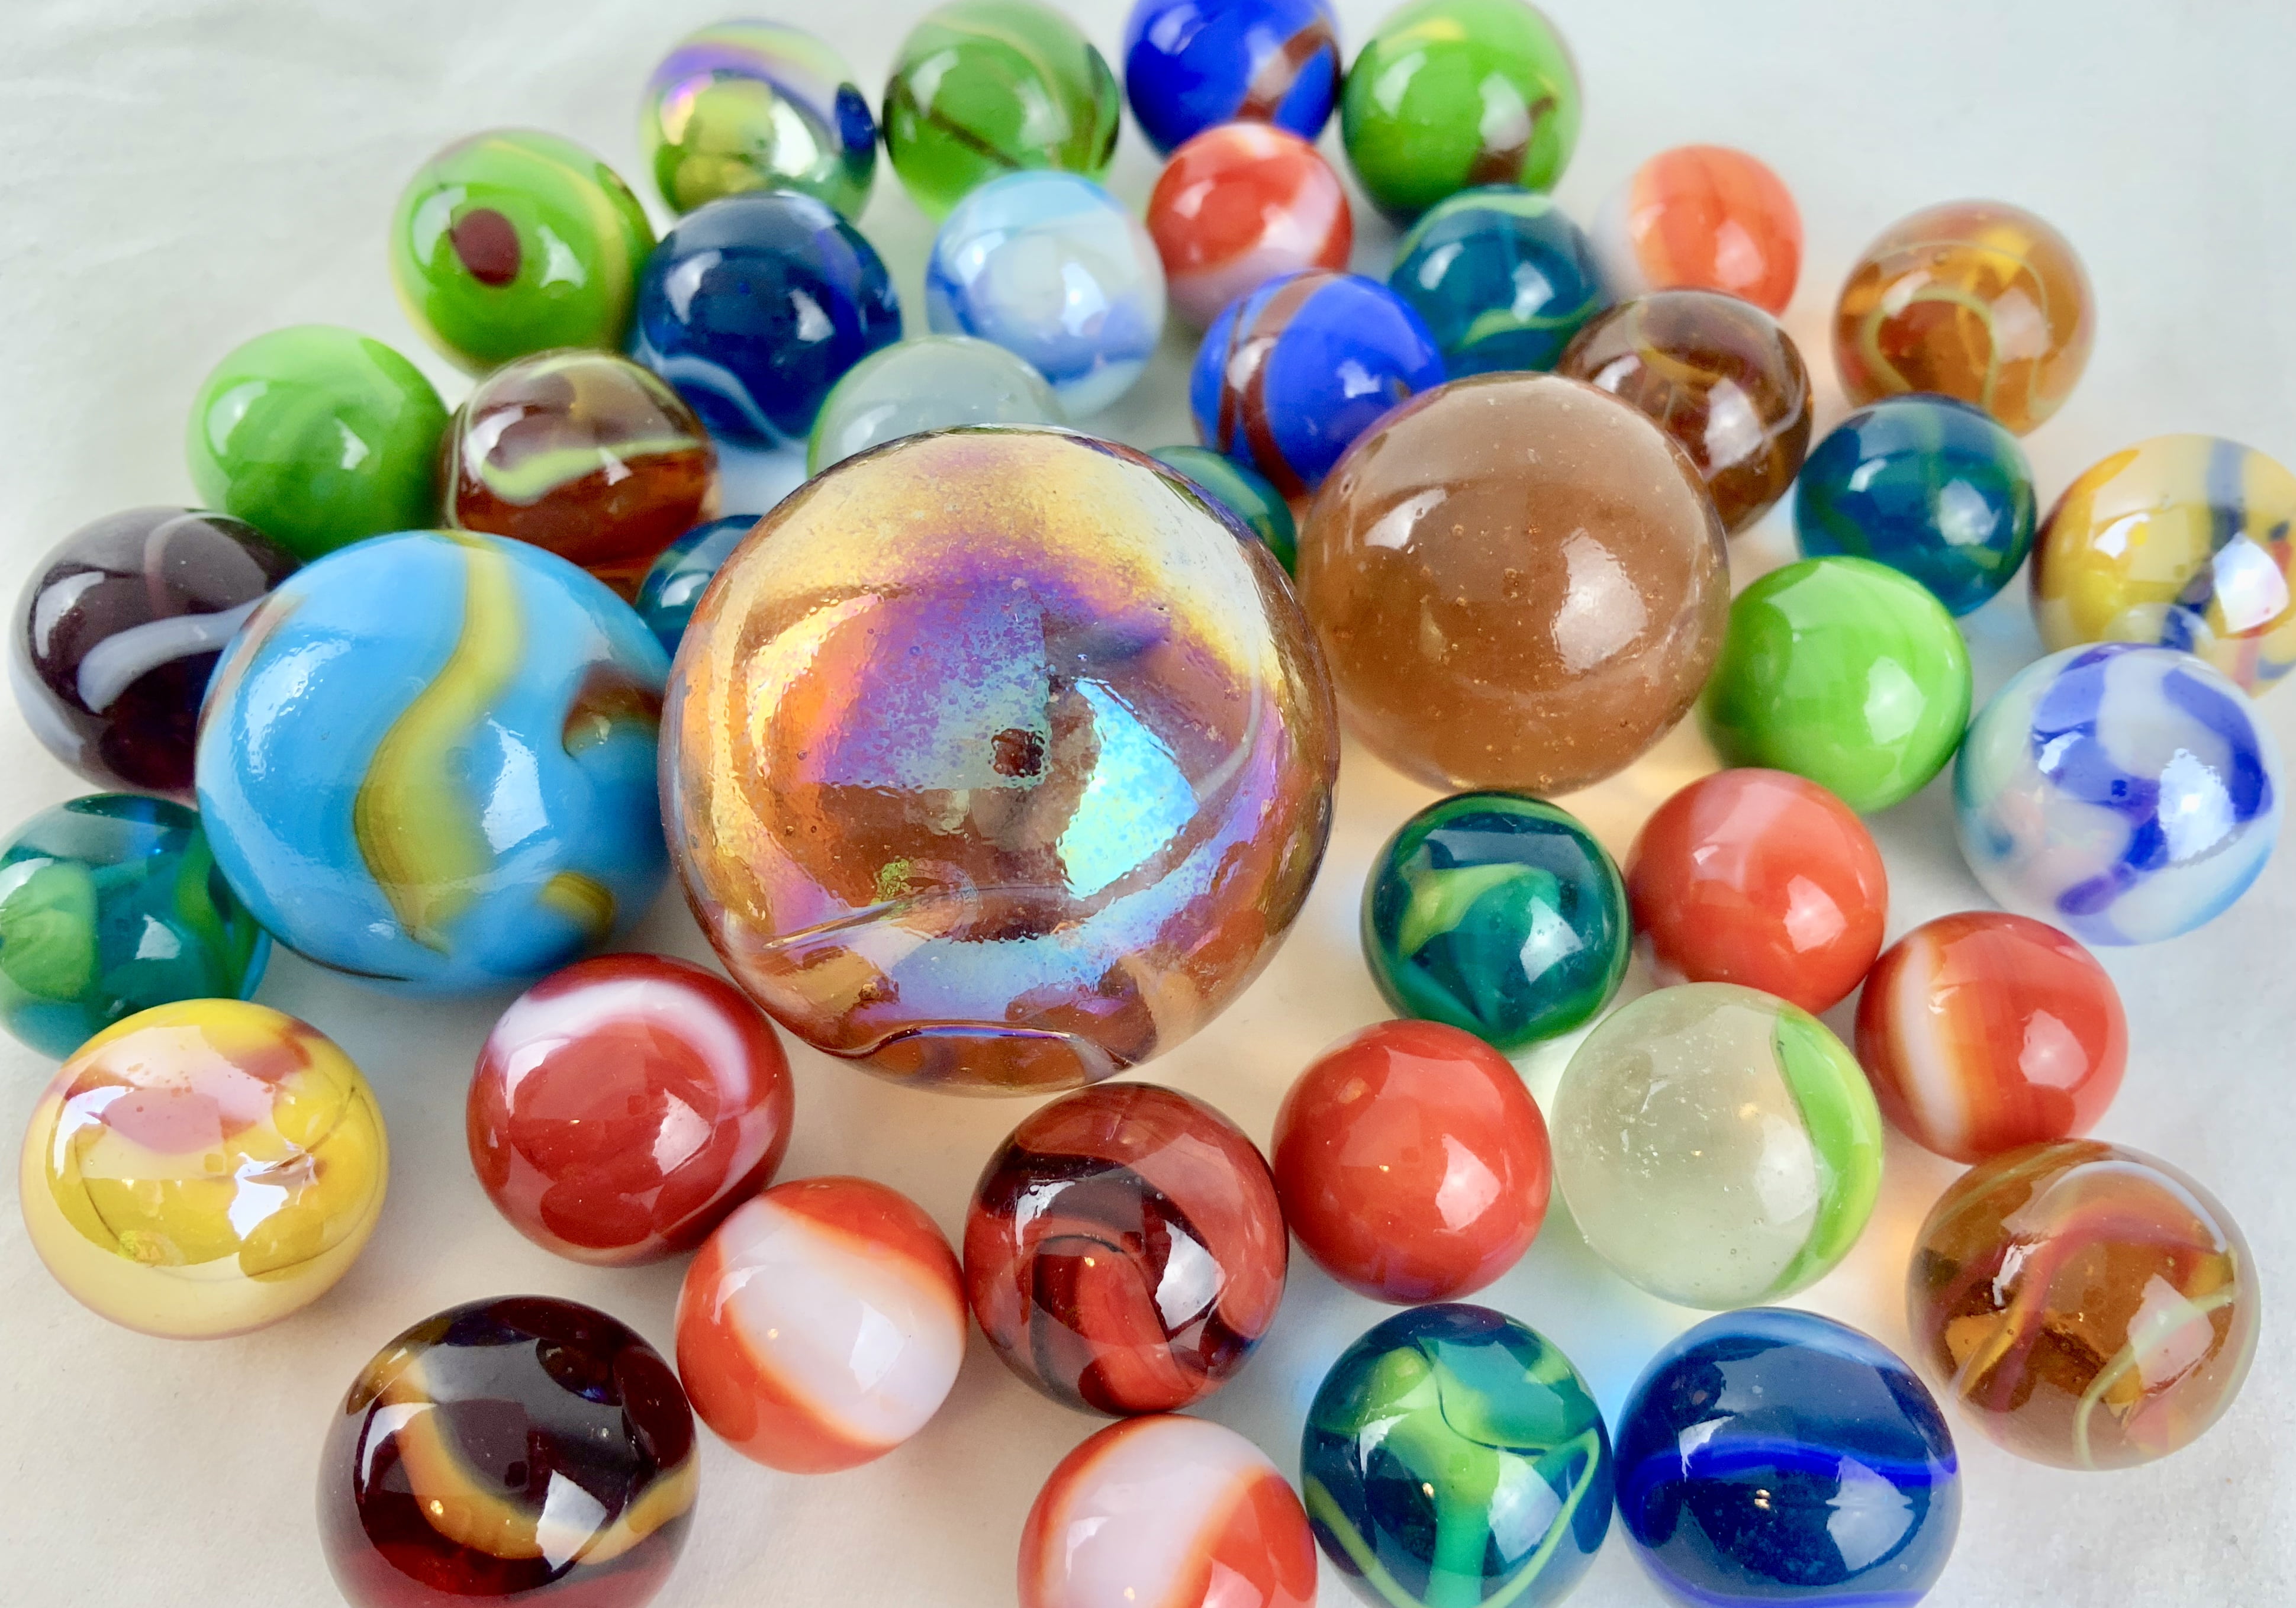 NEW 10 THUNDERBOLT 16mm GLASS MARBLES TRADITIONAL GAME or COLLECTORS ITEMS HOM 